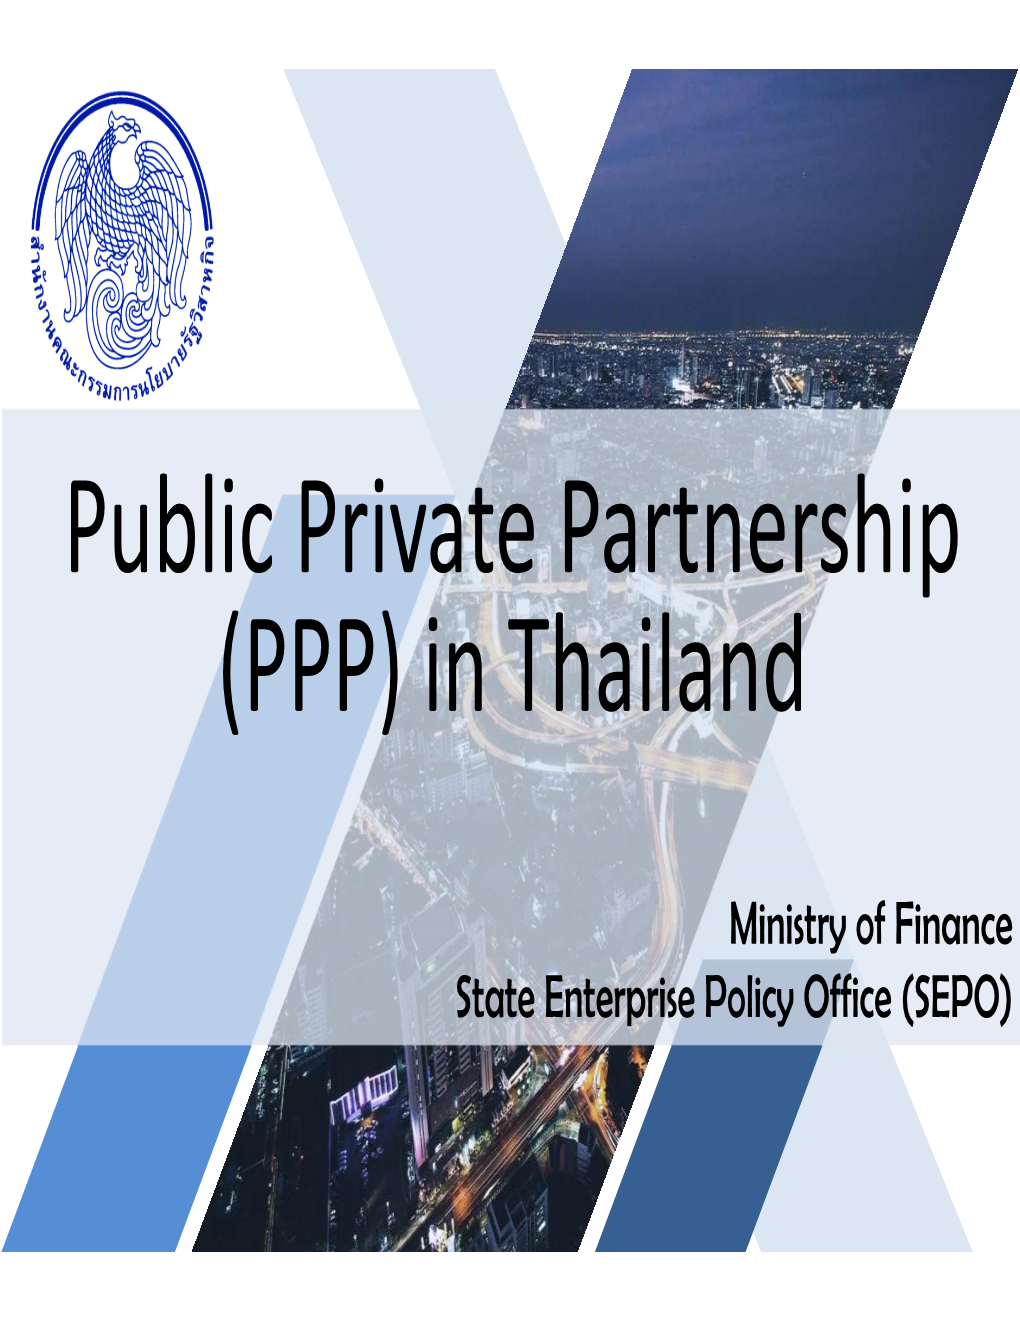 Public Private Partnership (PPP) in Thailand